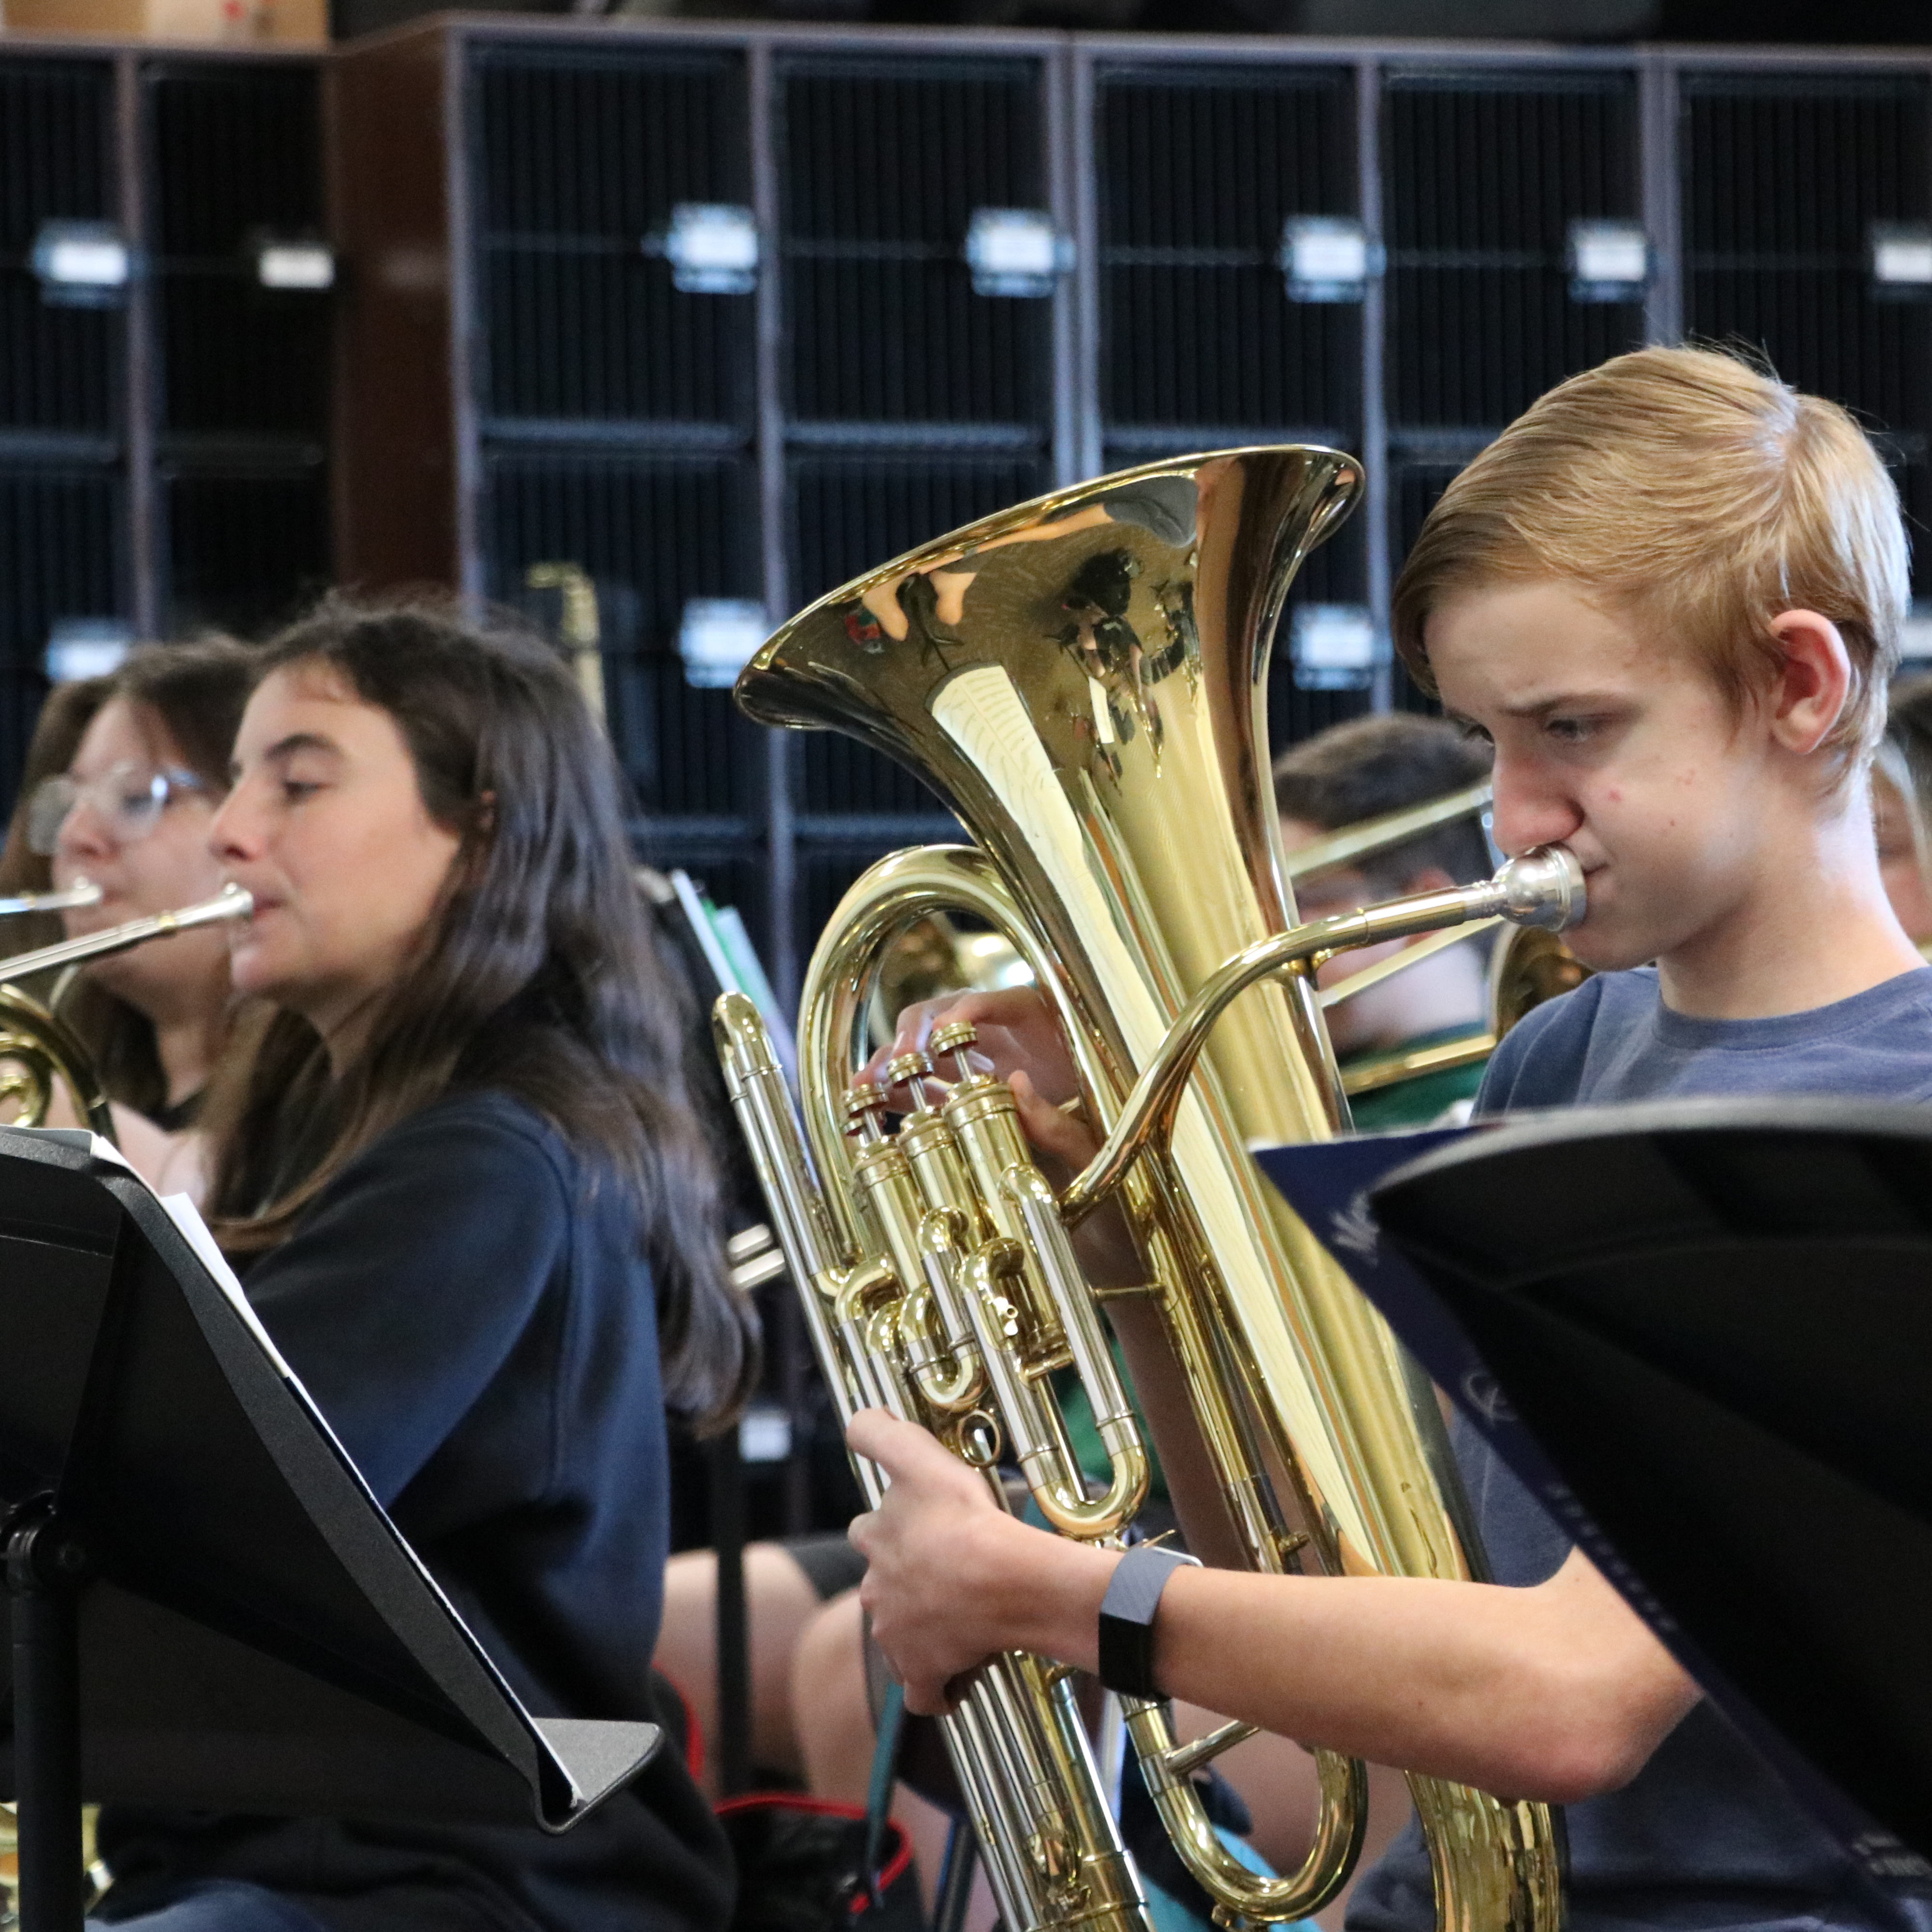 Middle School students play instruments in band